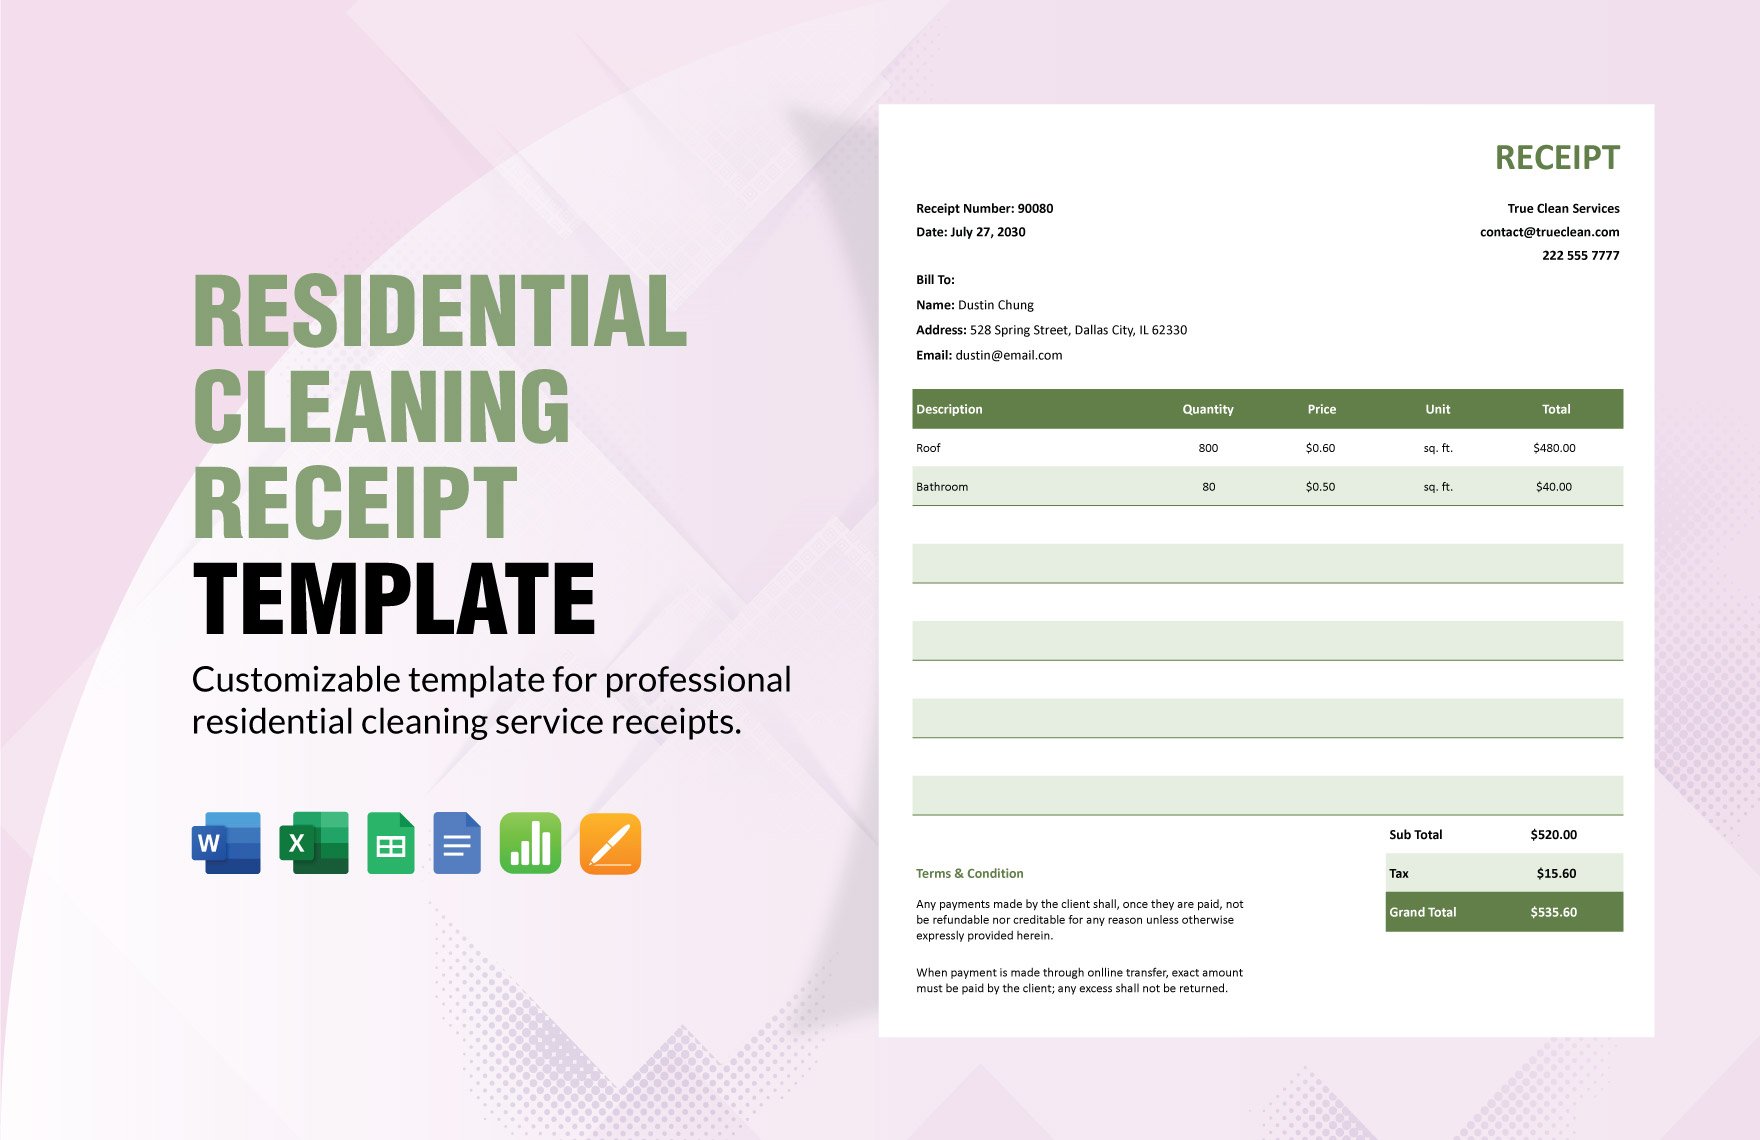 Residential Cleaning Receipt Template in Word, Google Docs, Excel, Google Sheets, Apple Pages, Apple Numbers